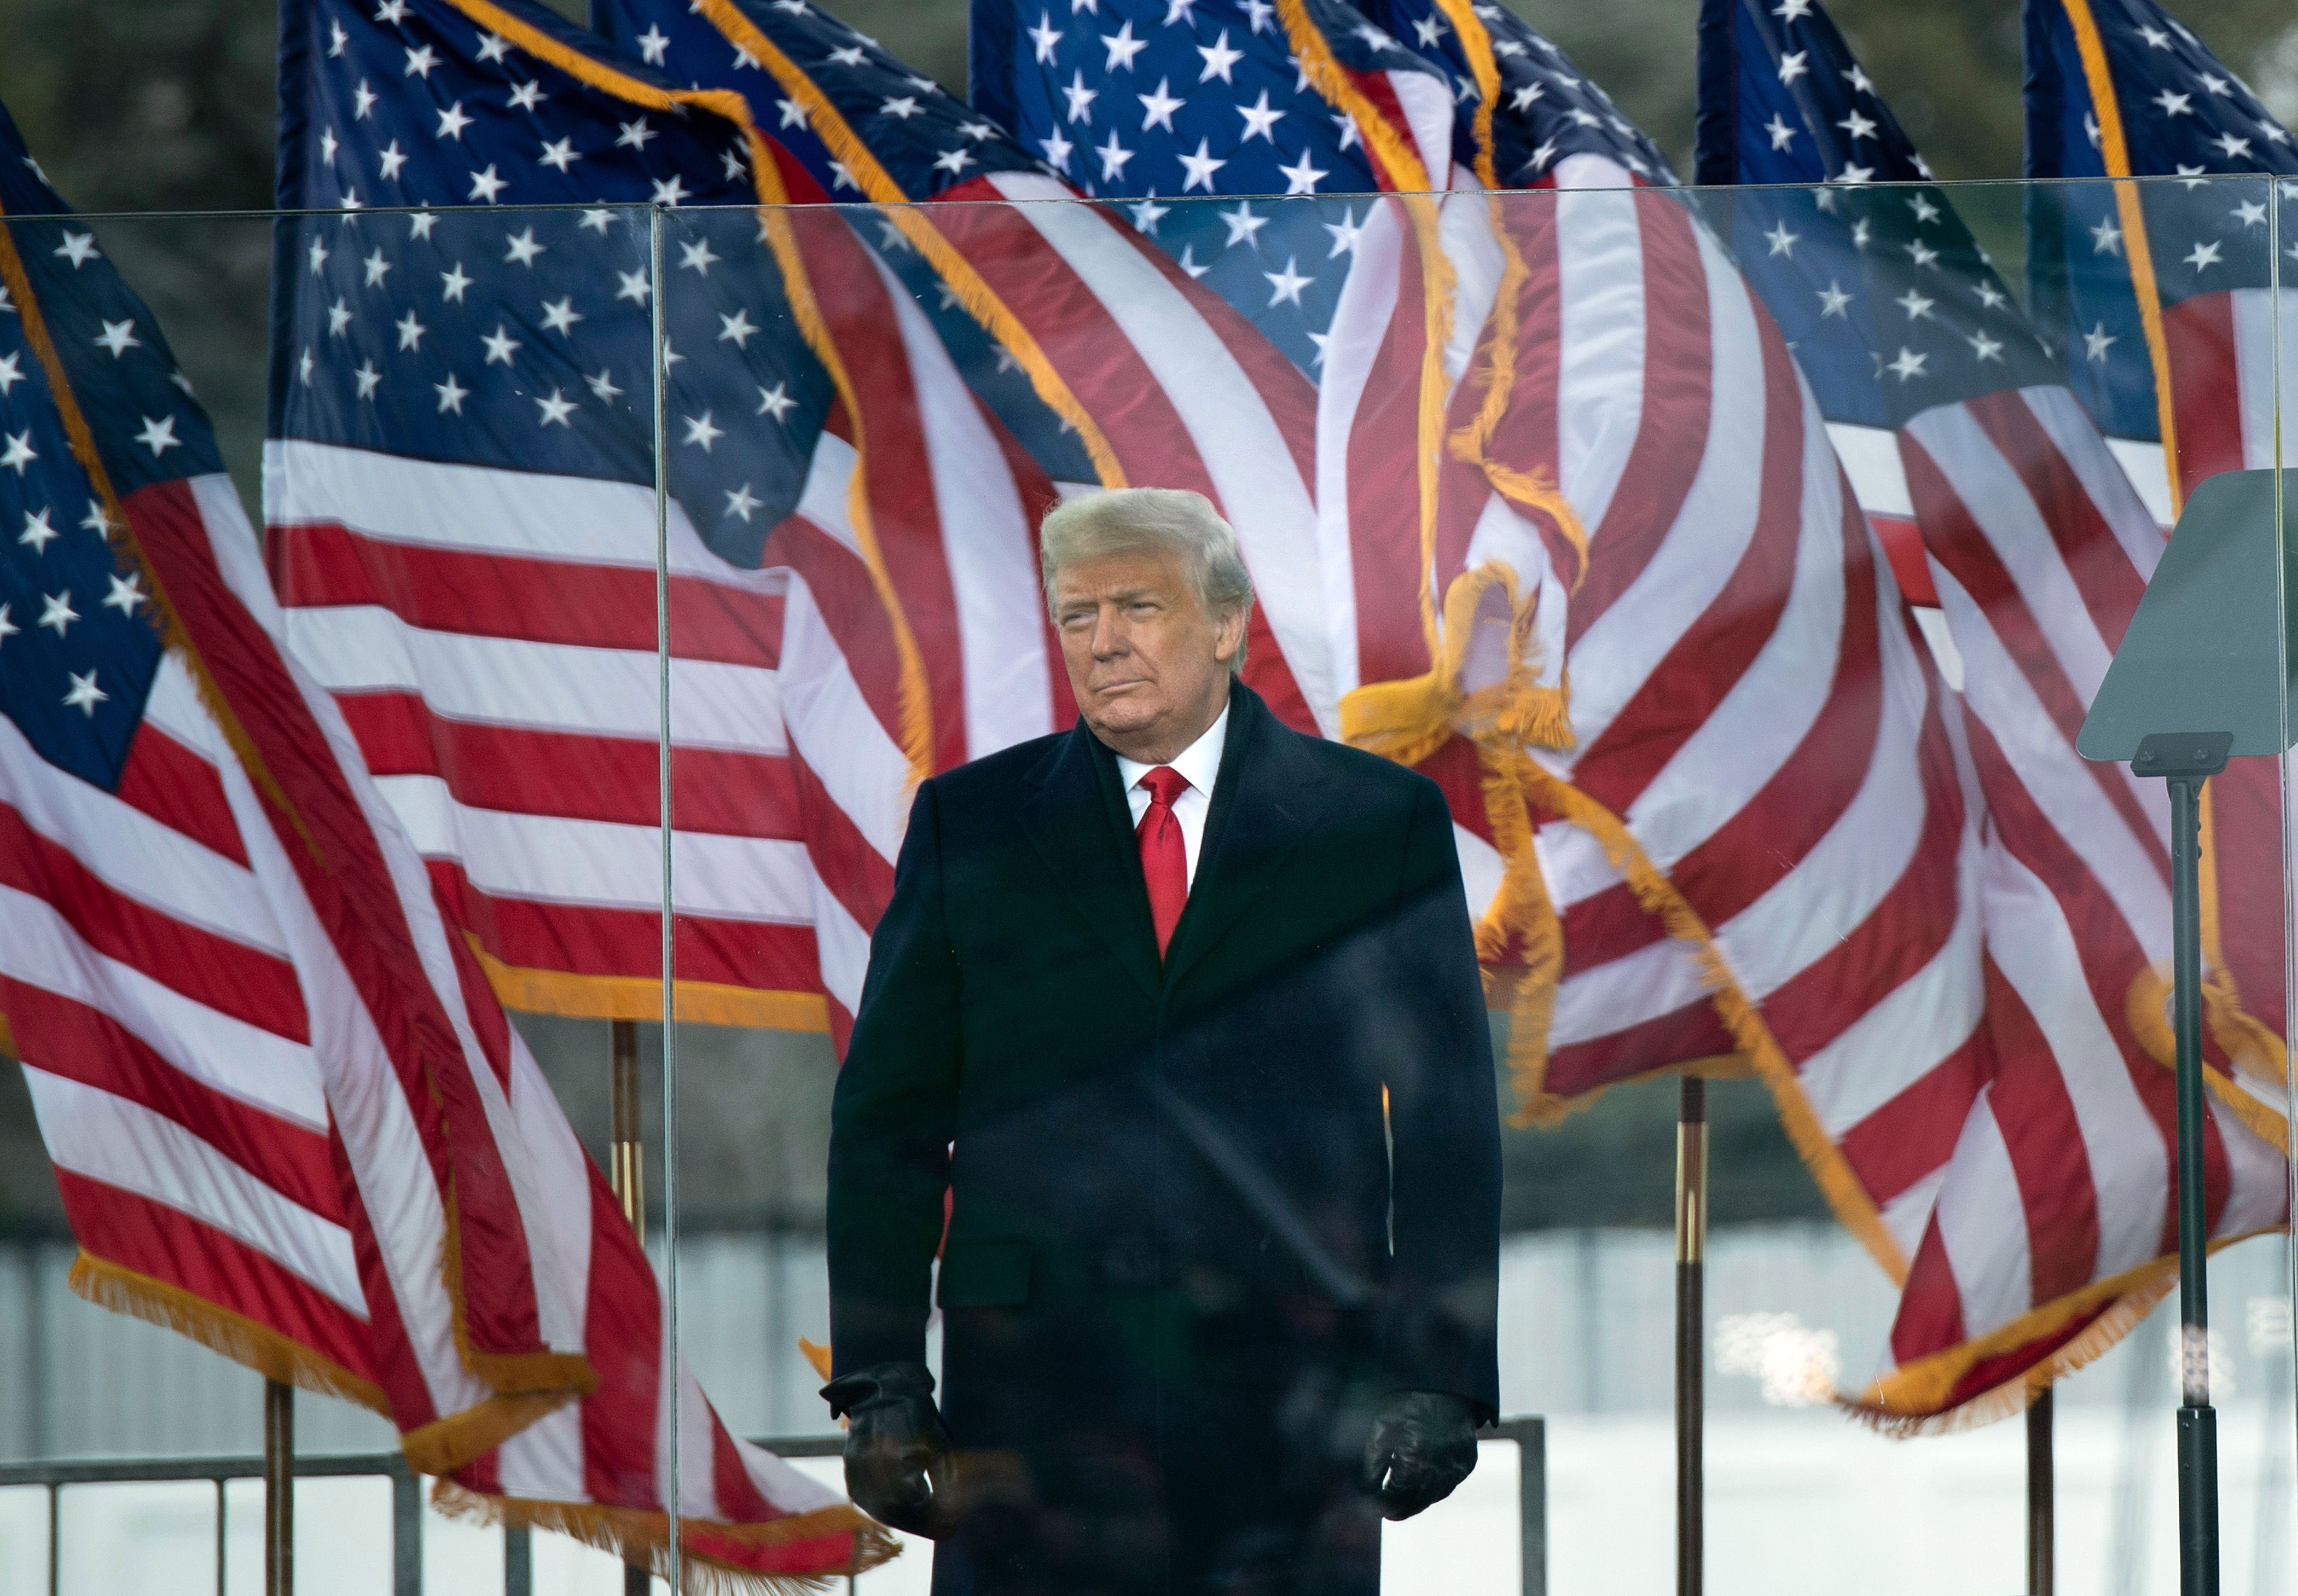 President Donald Trump arrives at a rally near the White House on January 6.